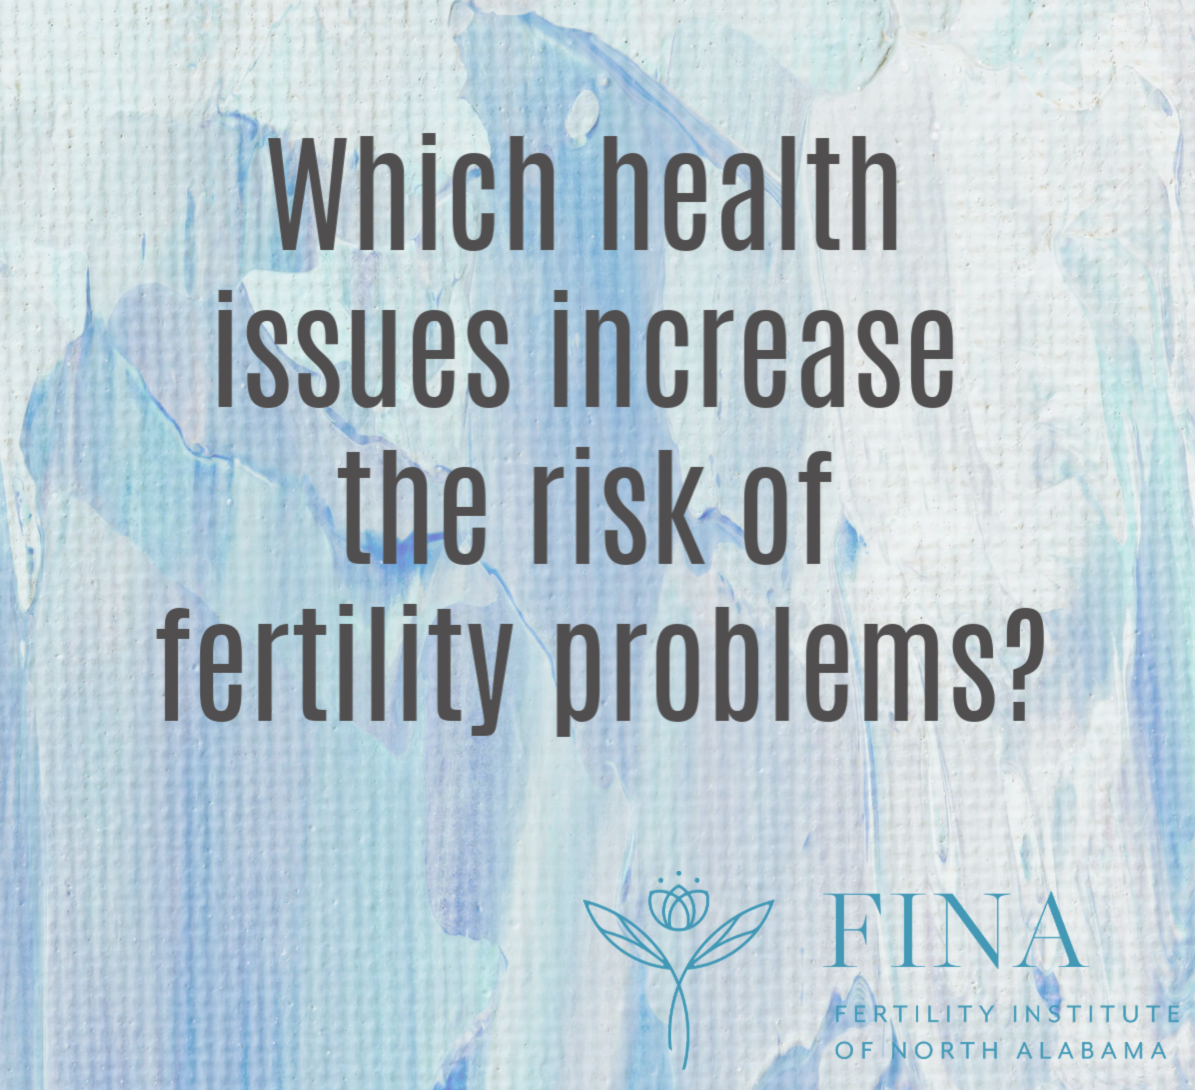 Do certain health issues increase the risk of fertility problems?